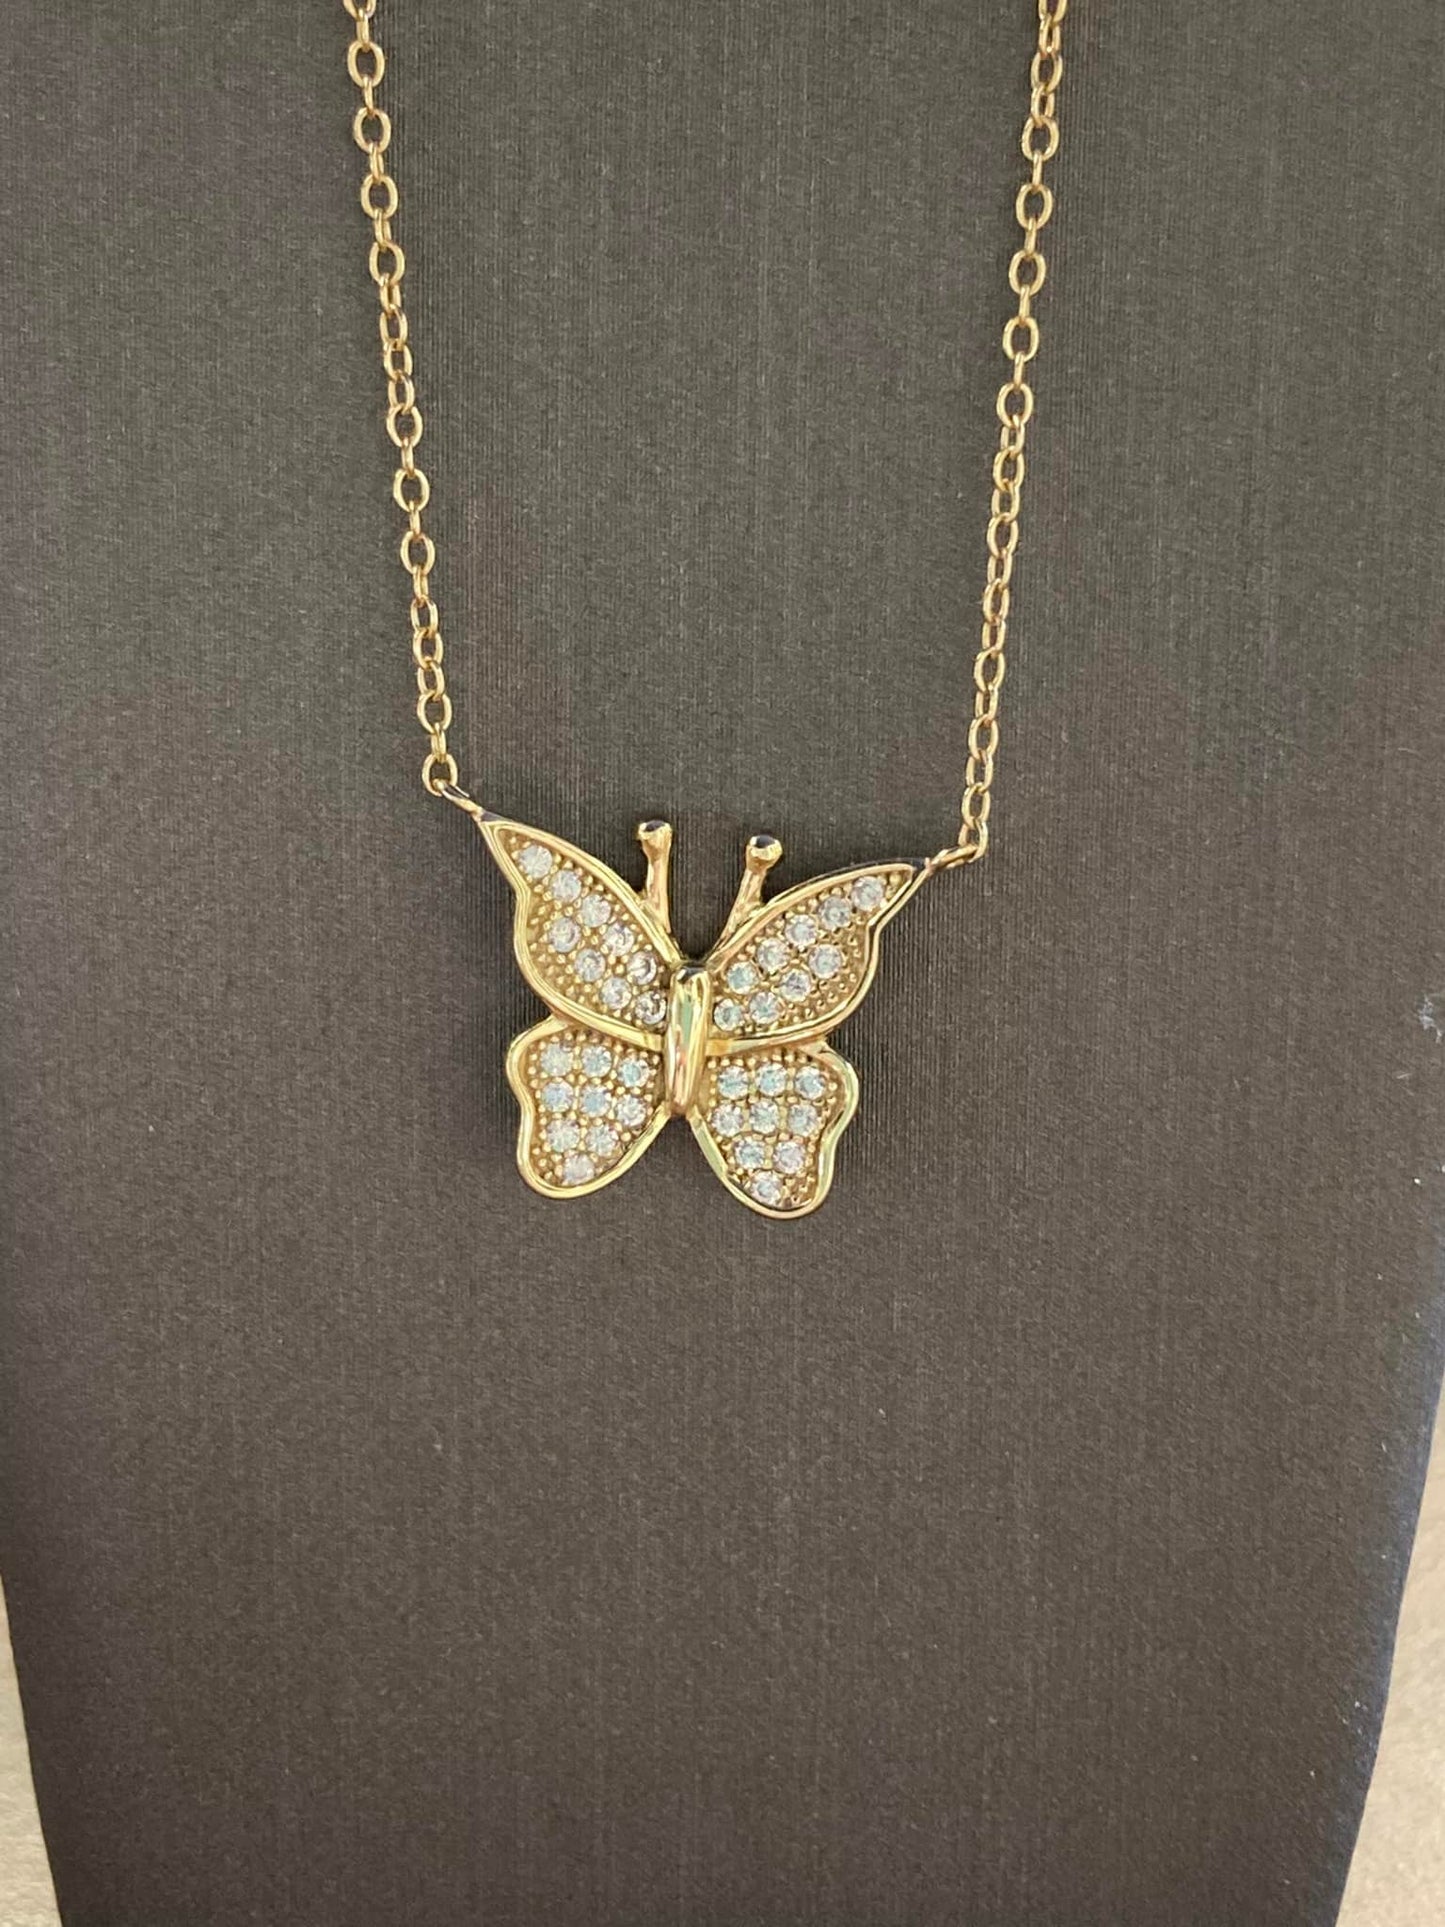 Gold Plated CZ Butterfly Necklace 16" + 2" $38